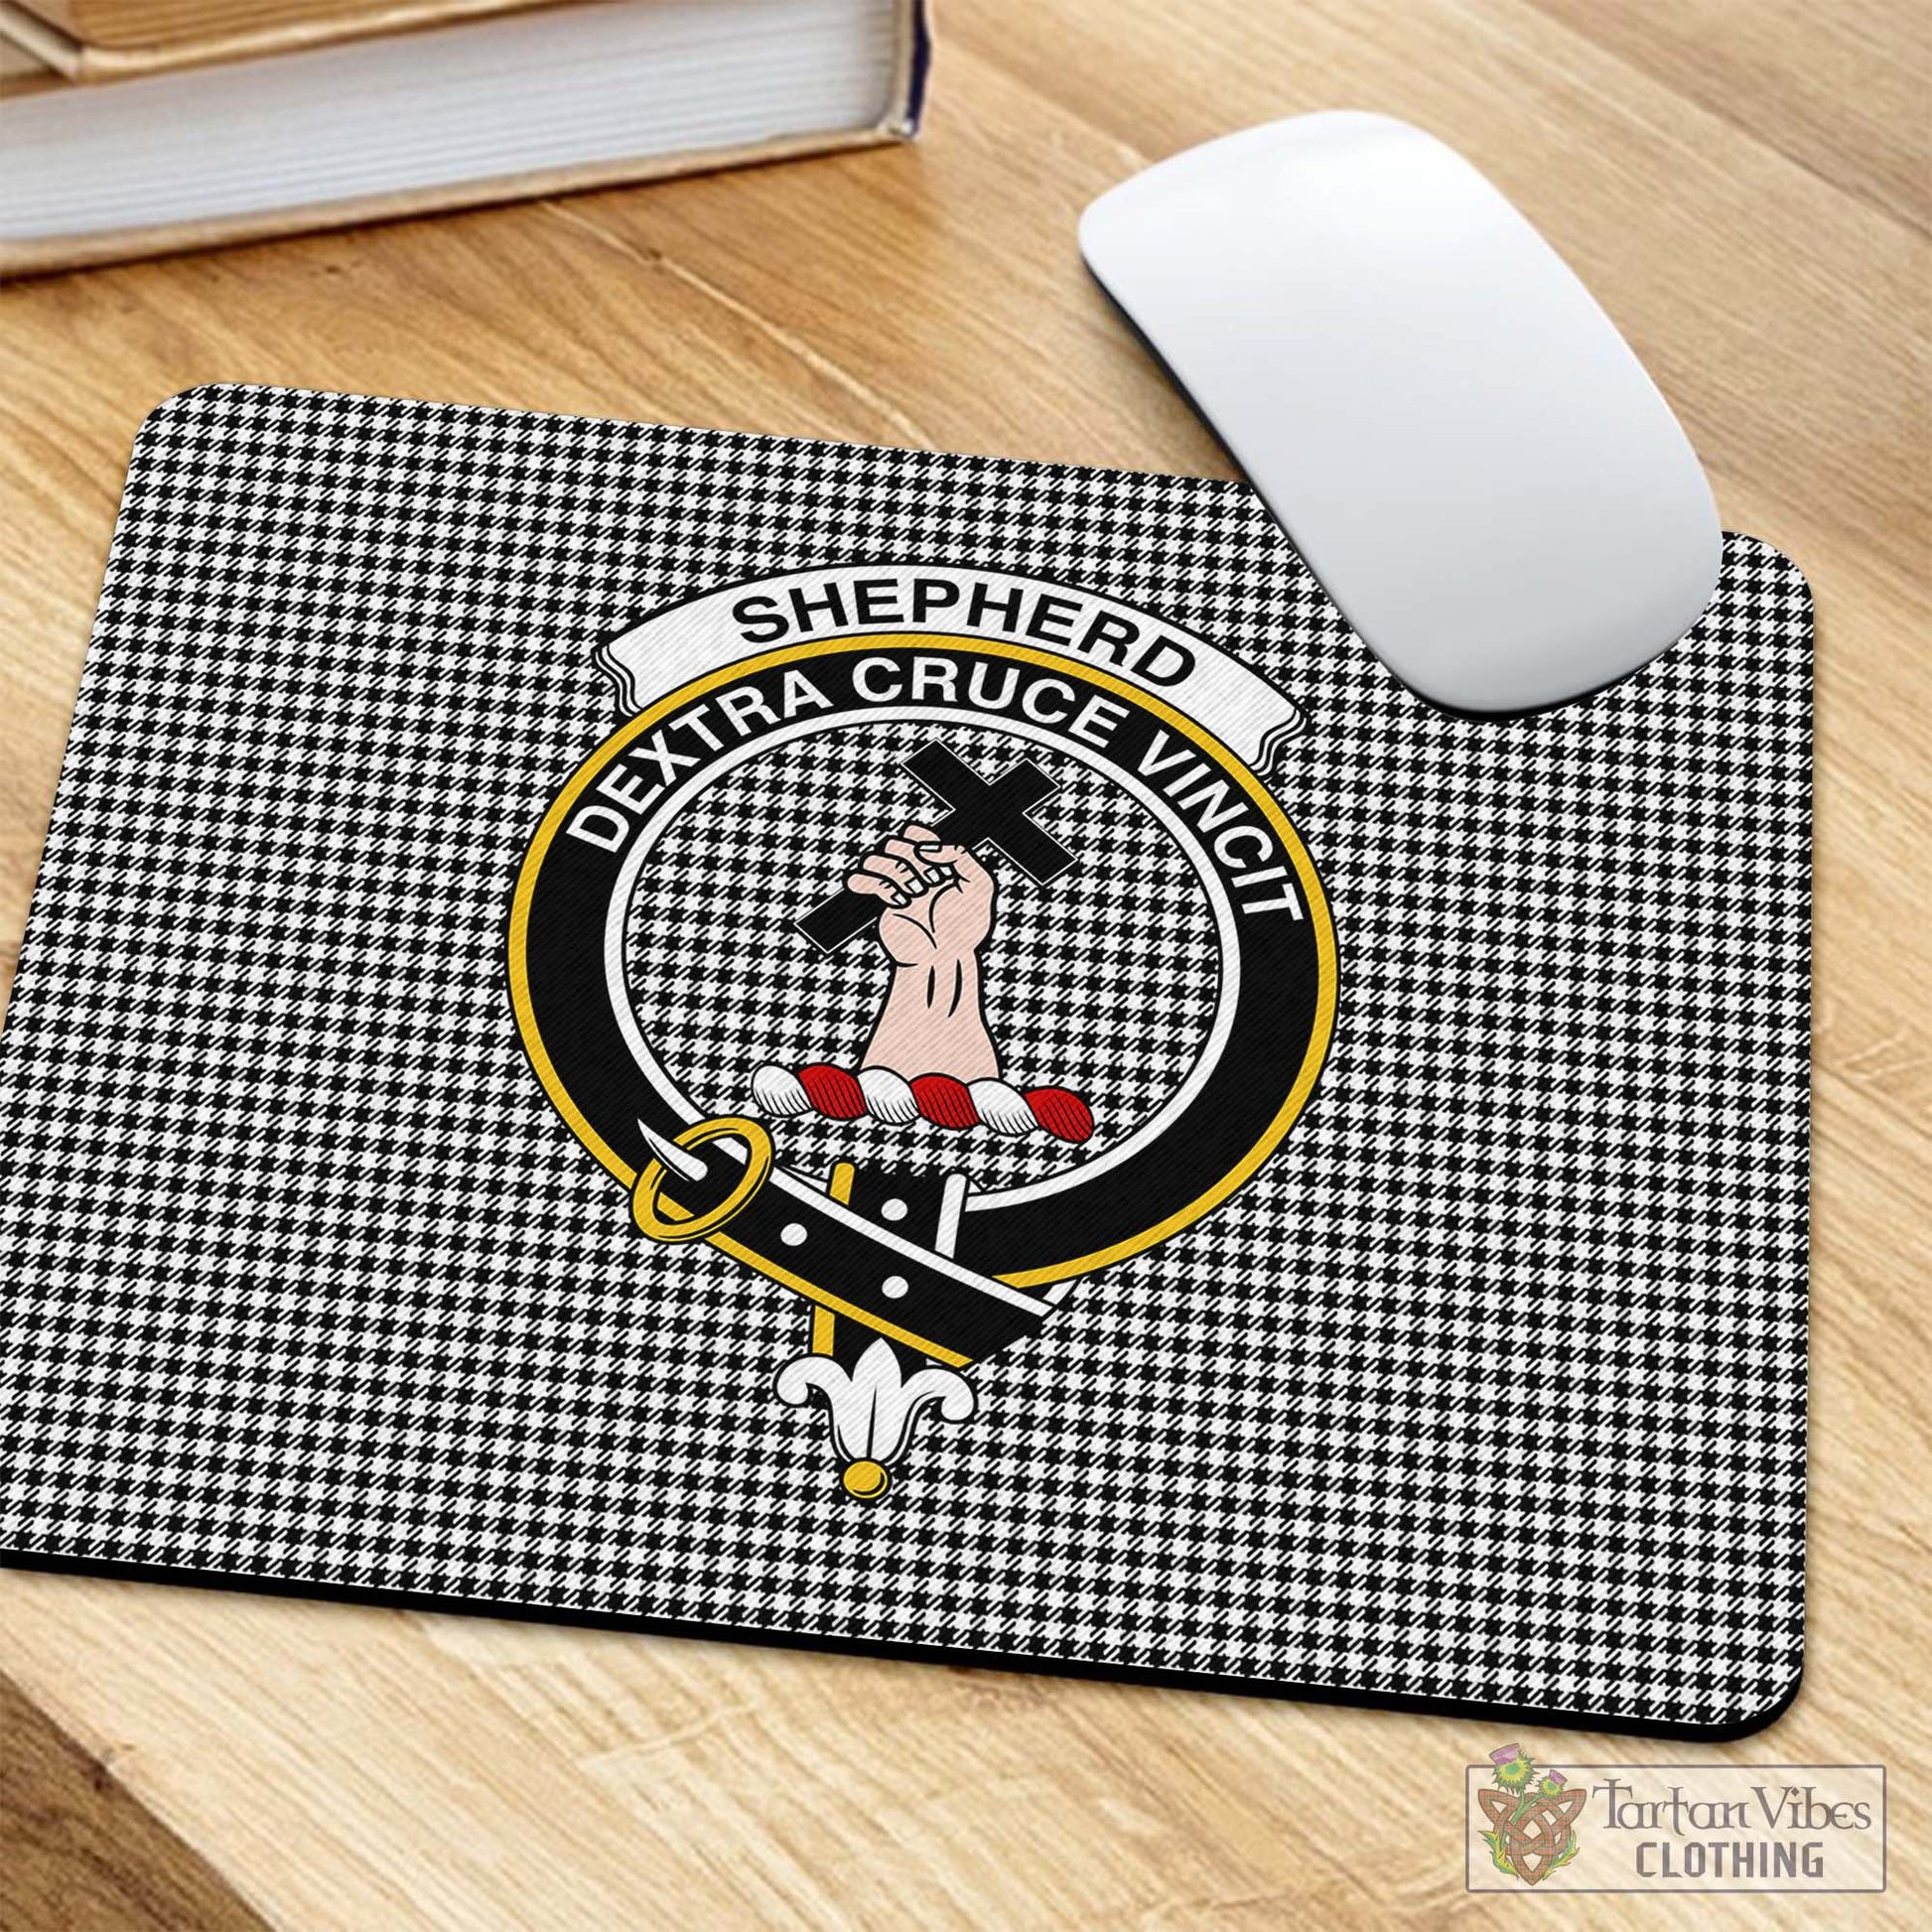 Tartan Vibes Clothing Shepherd Tartan Mouse Pad with Family Crest